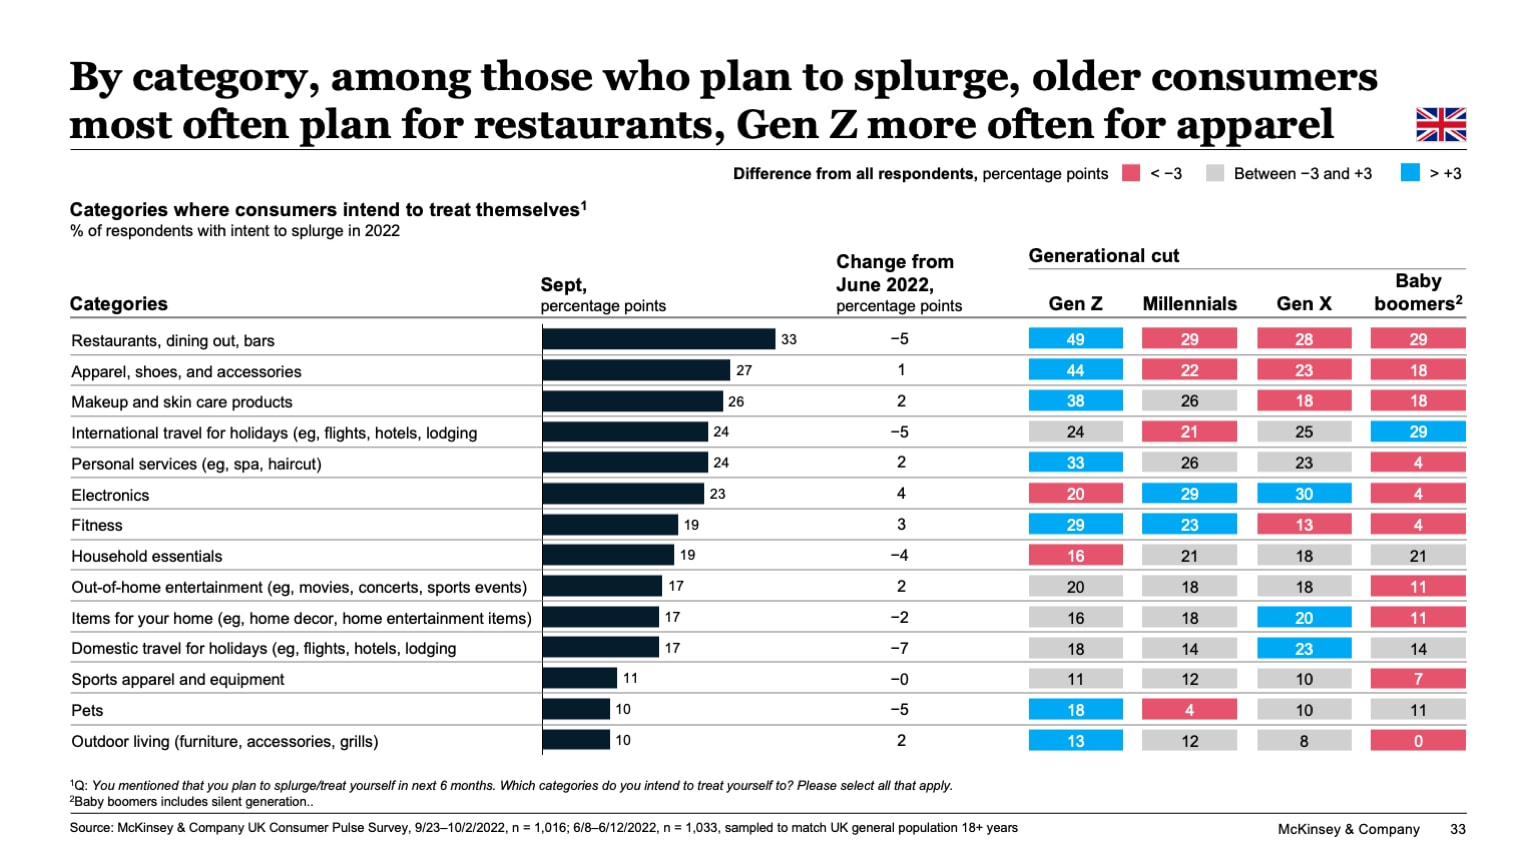 By category, among those who plan to splurge, older consumers most often plan for restaurants, Gen Z more often for apparel